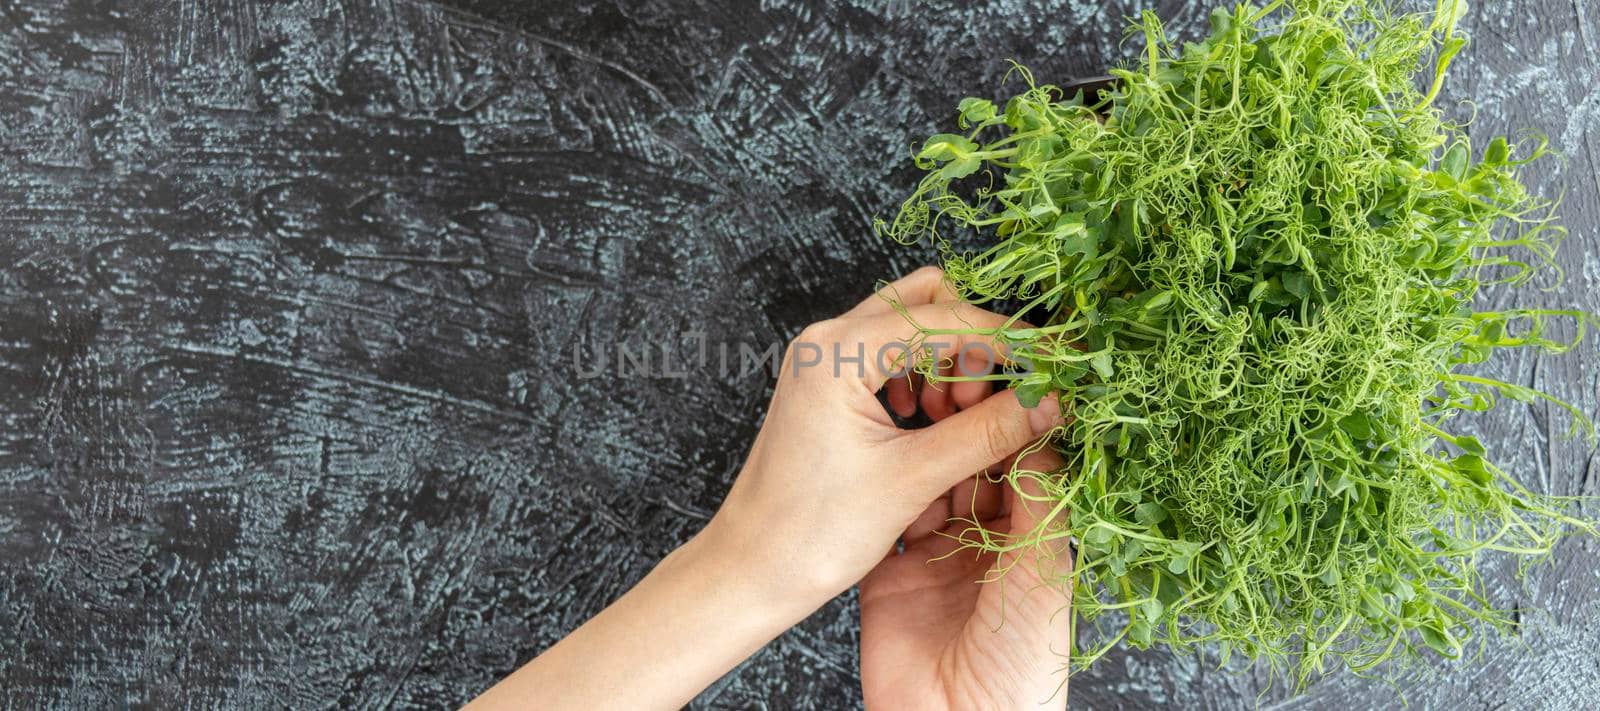 banner with Female hands pluck young sprouts of peas or beans. green, juicy, fresh salad in container on black textured background. healthy food concept. by Leoschka